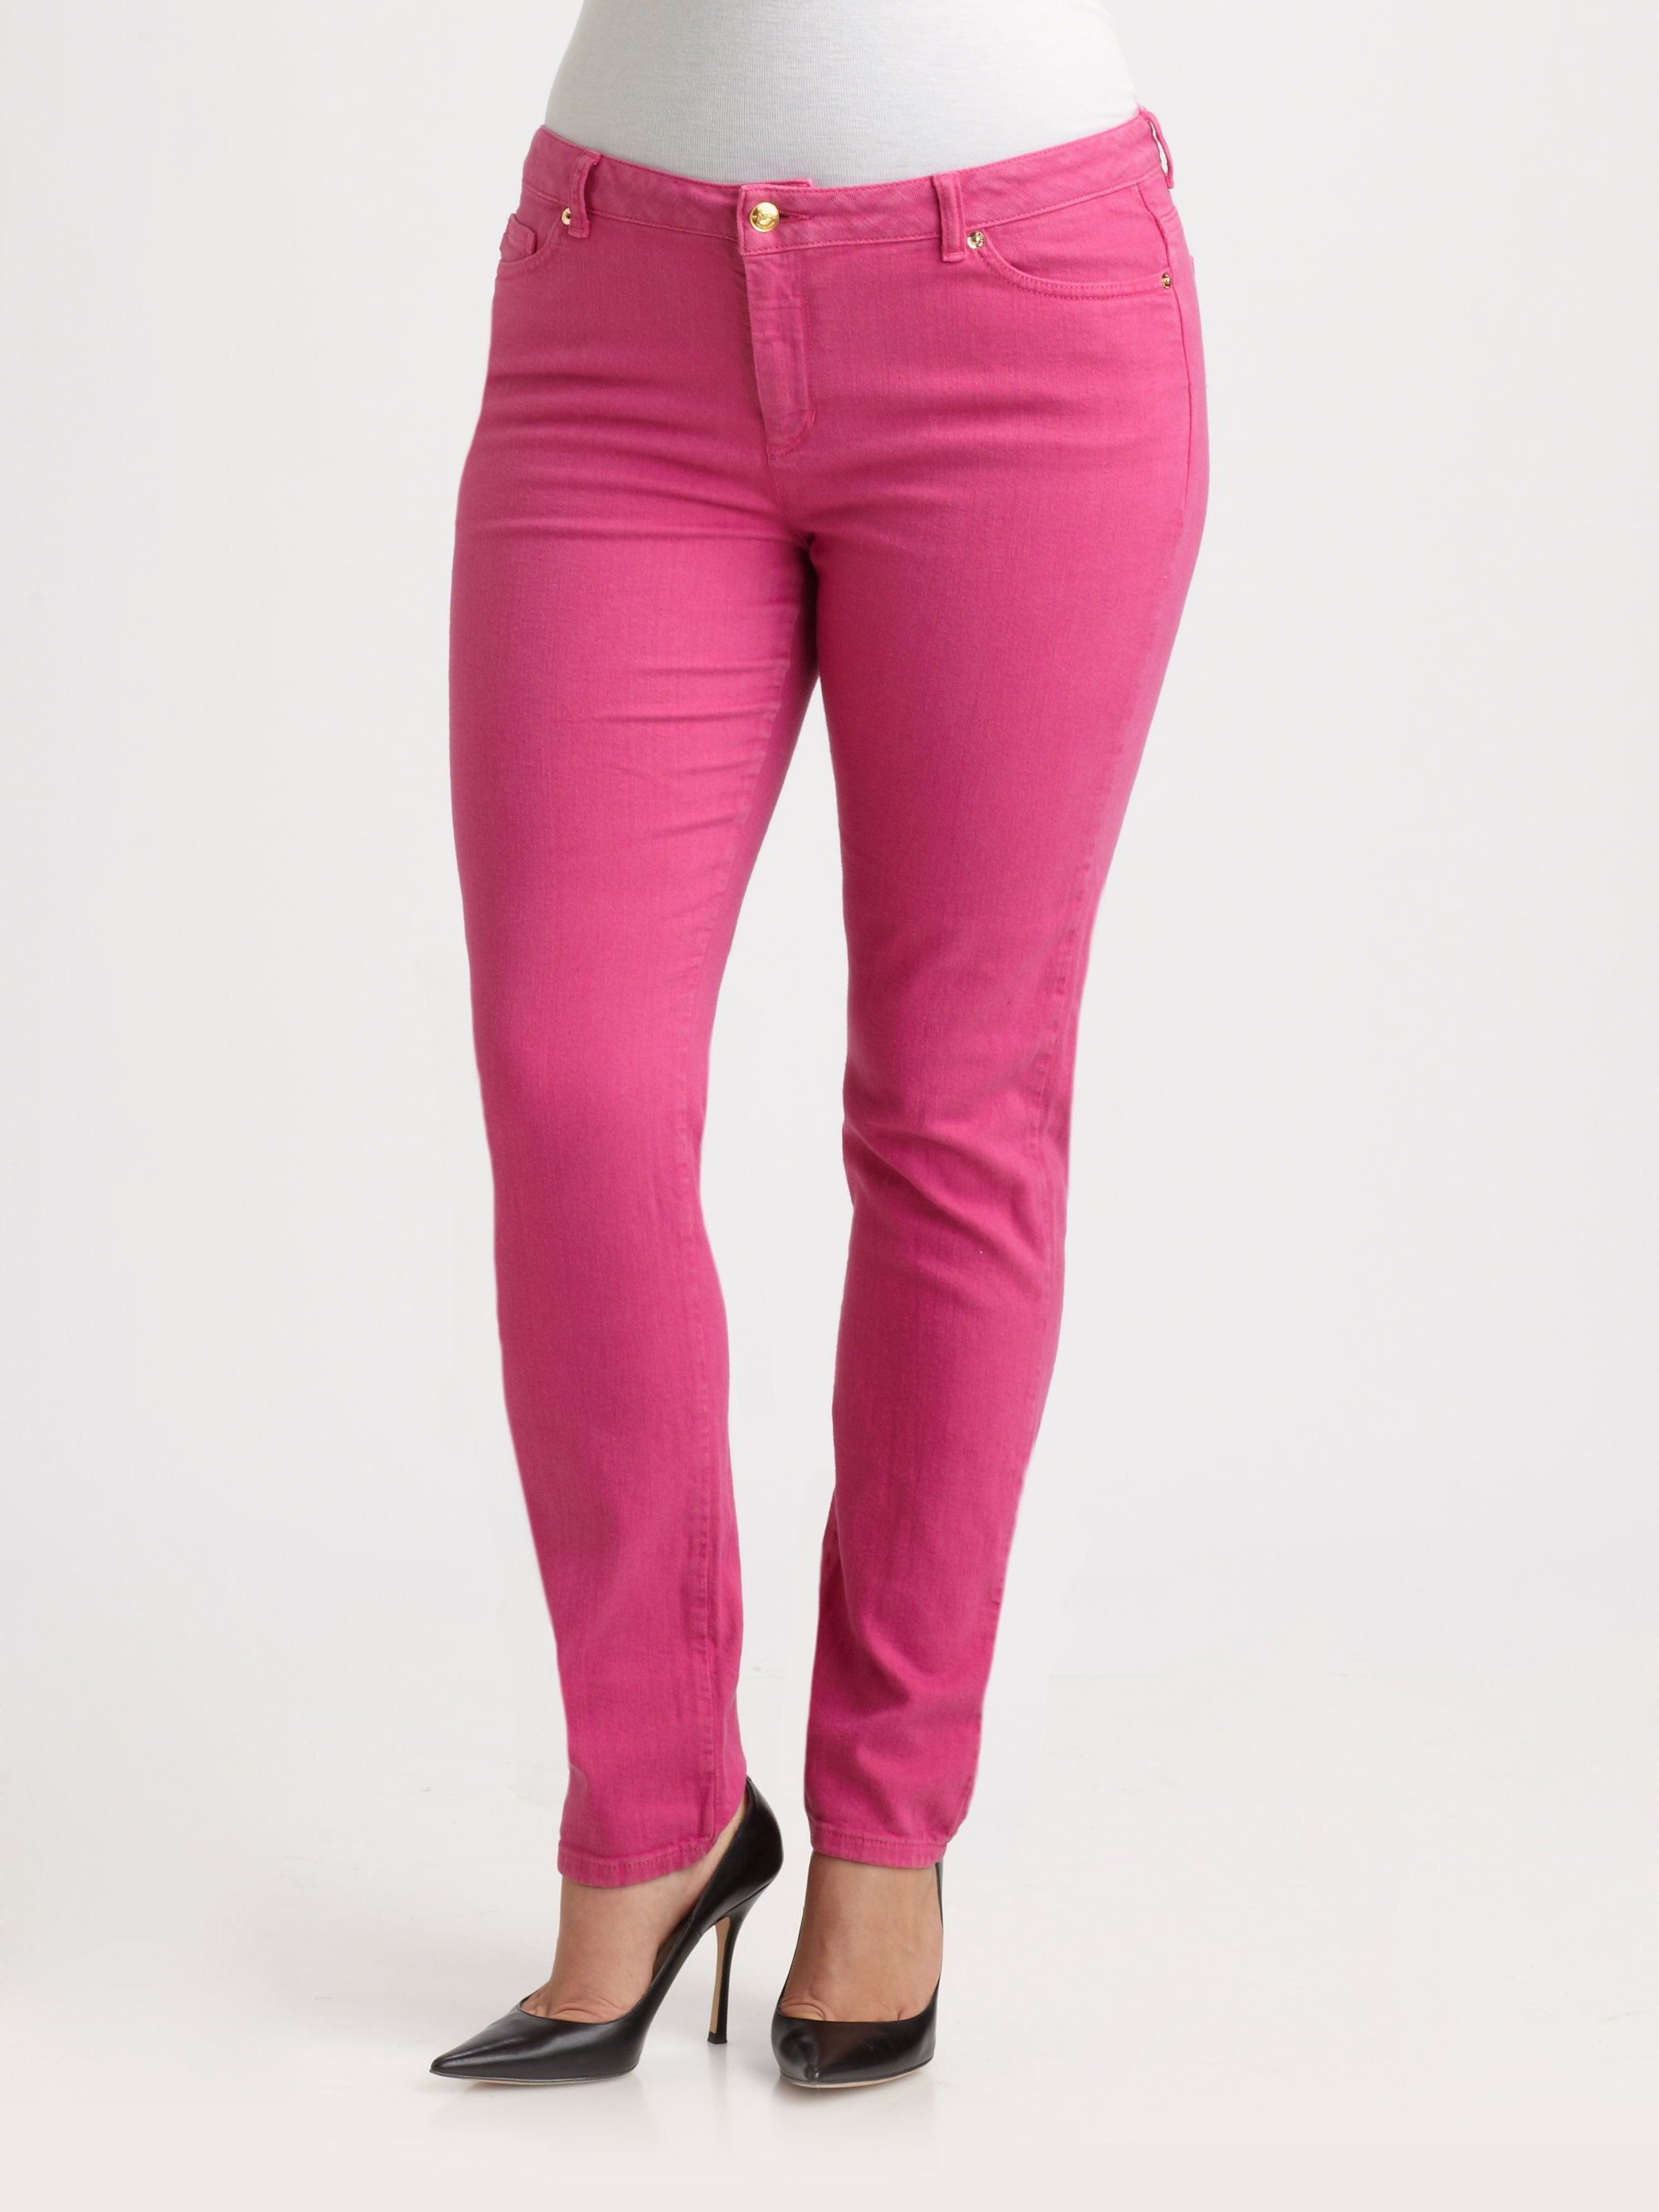 MICHAEL Michael Kors Colored Skinny Jeans in Pink - Lyst